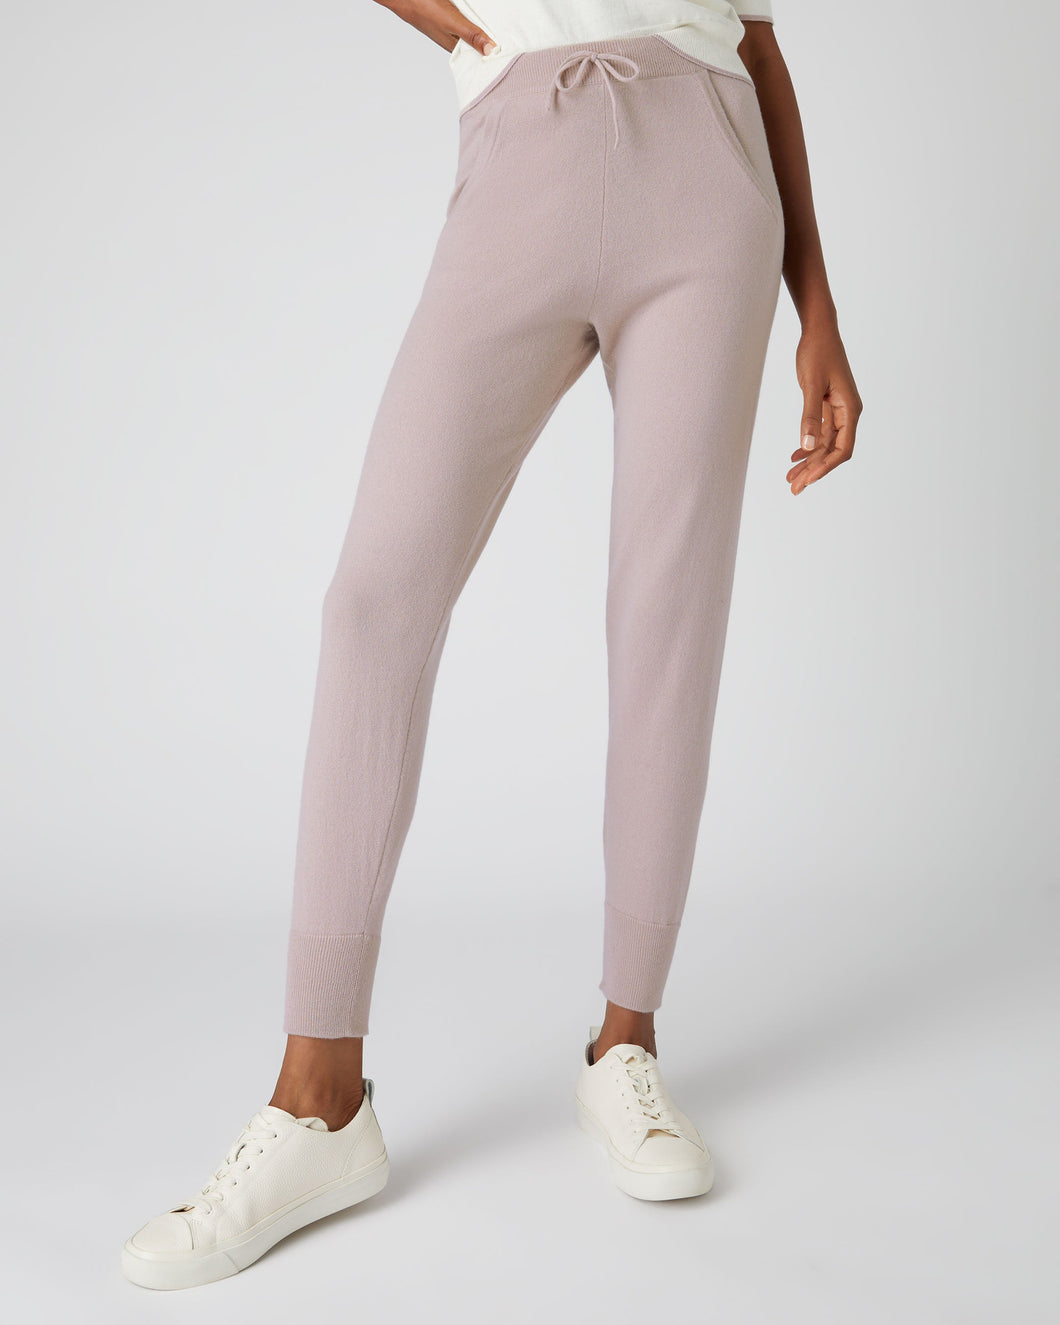 N.Peal Women's Plain Cashmere Lounge Trousers Canvas Pink